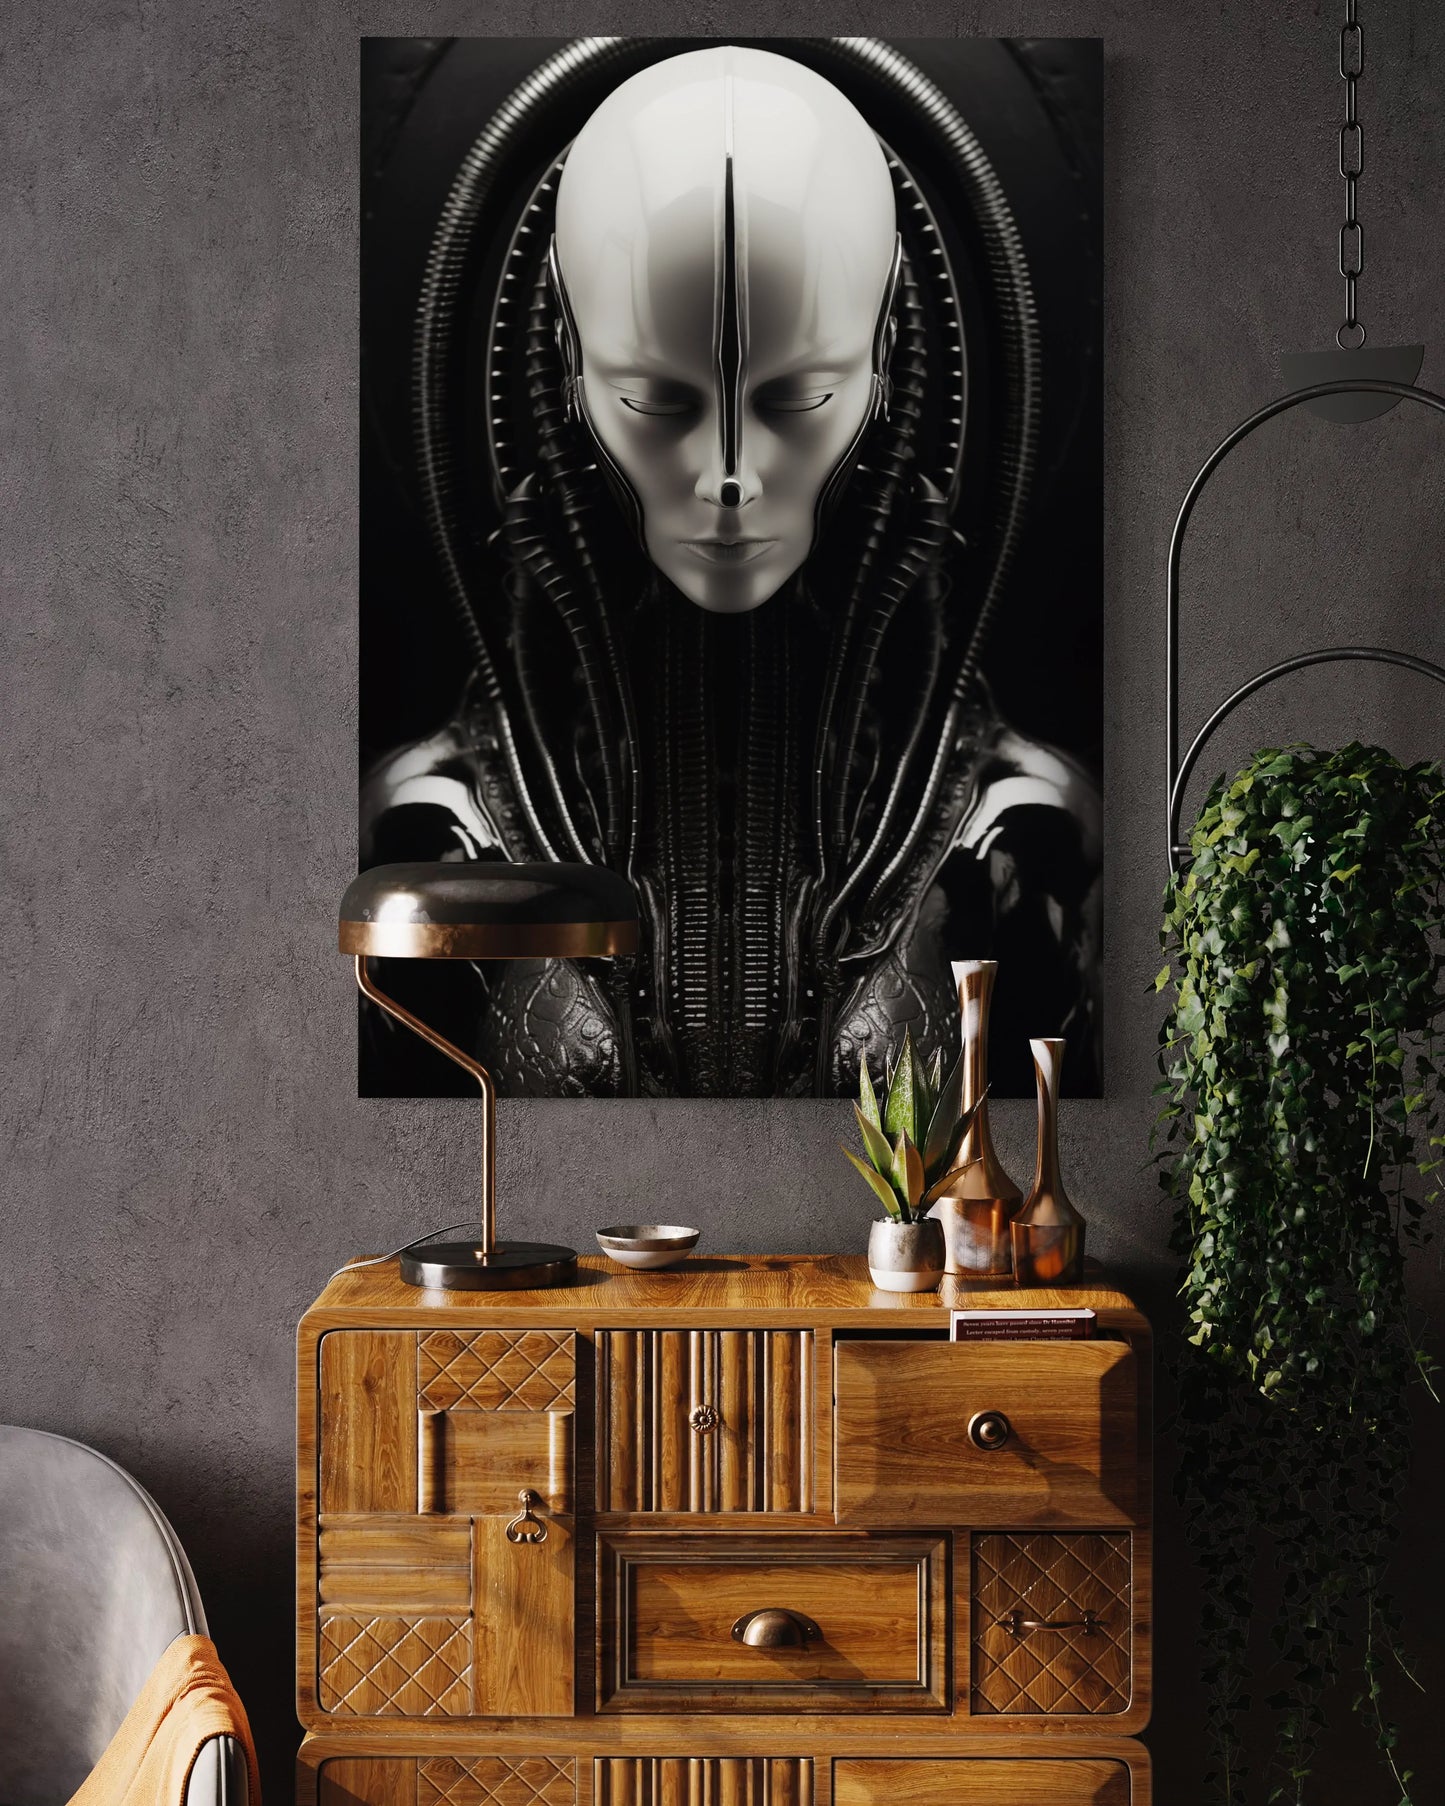 Alien_II - LIMITED EDITION  1 of 5